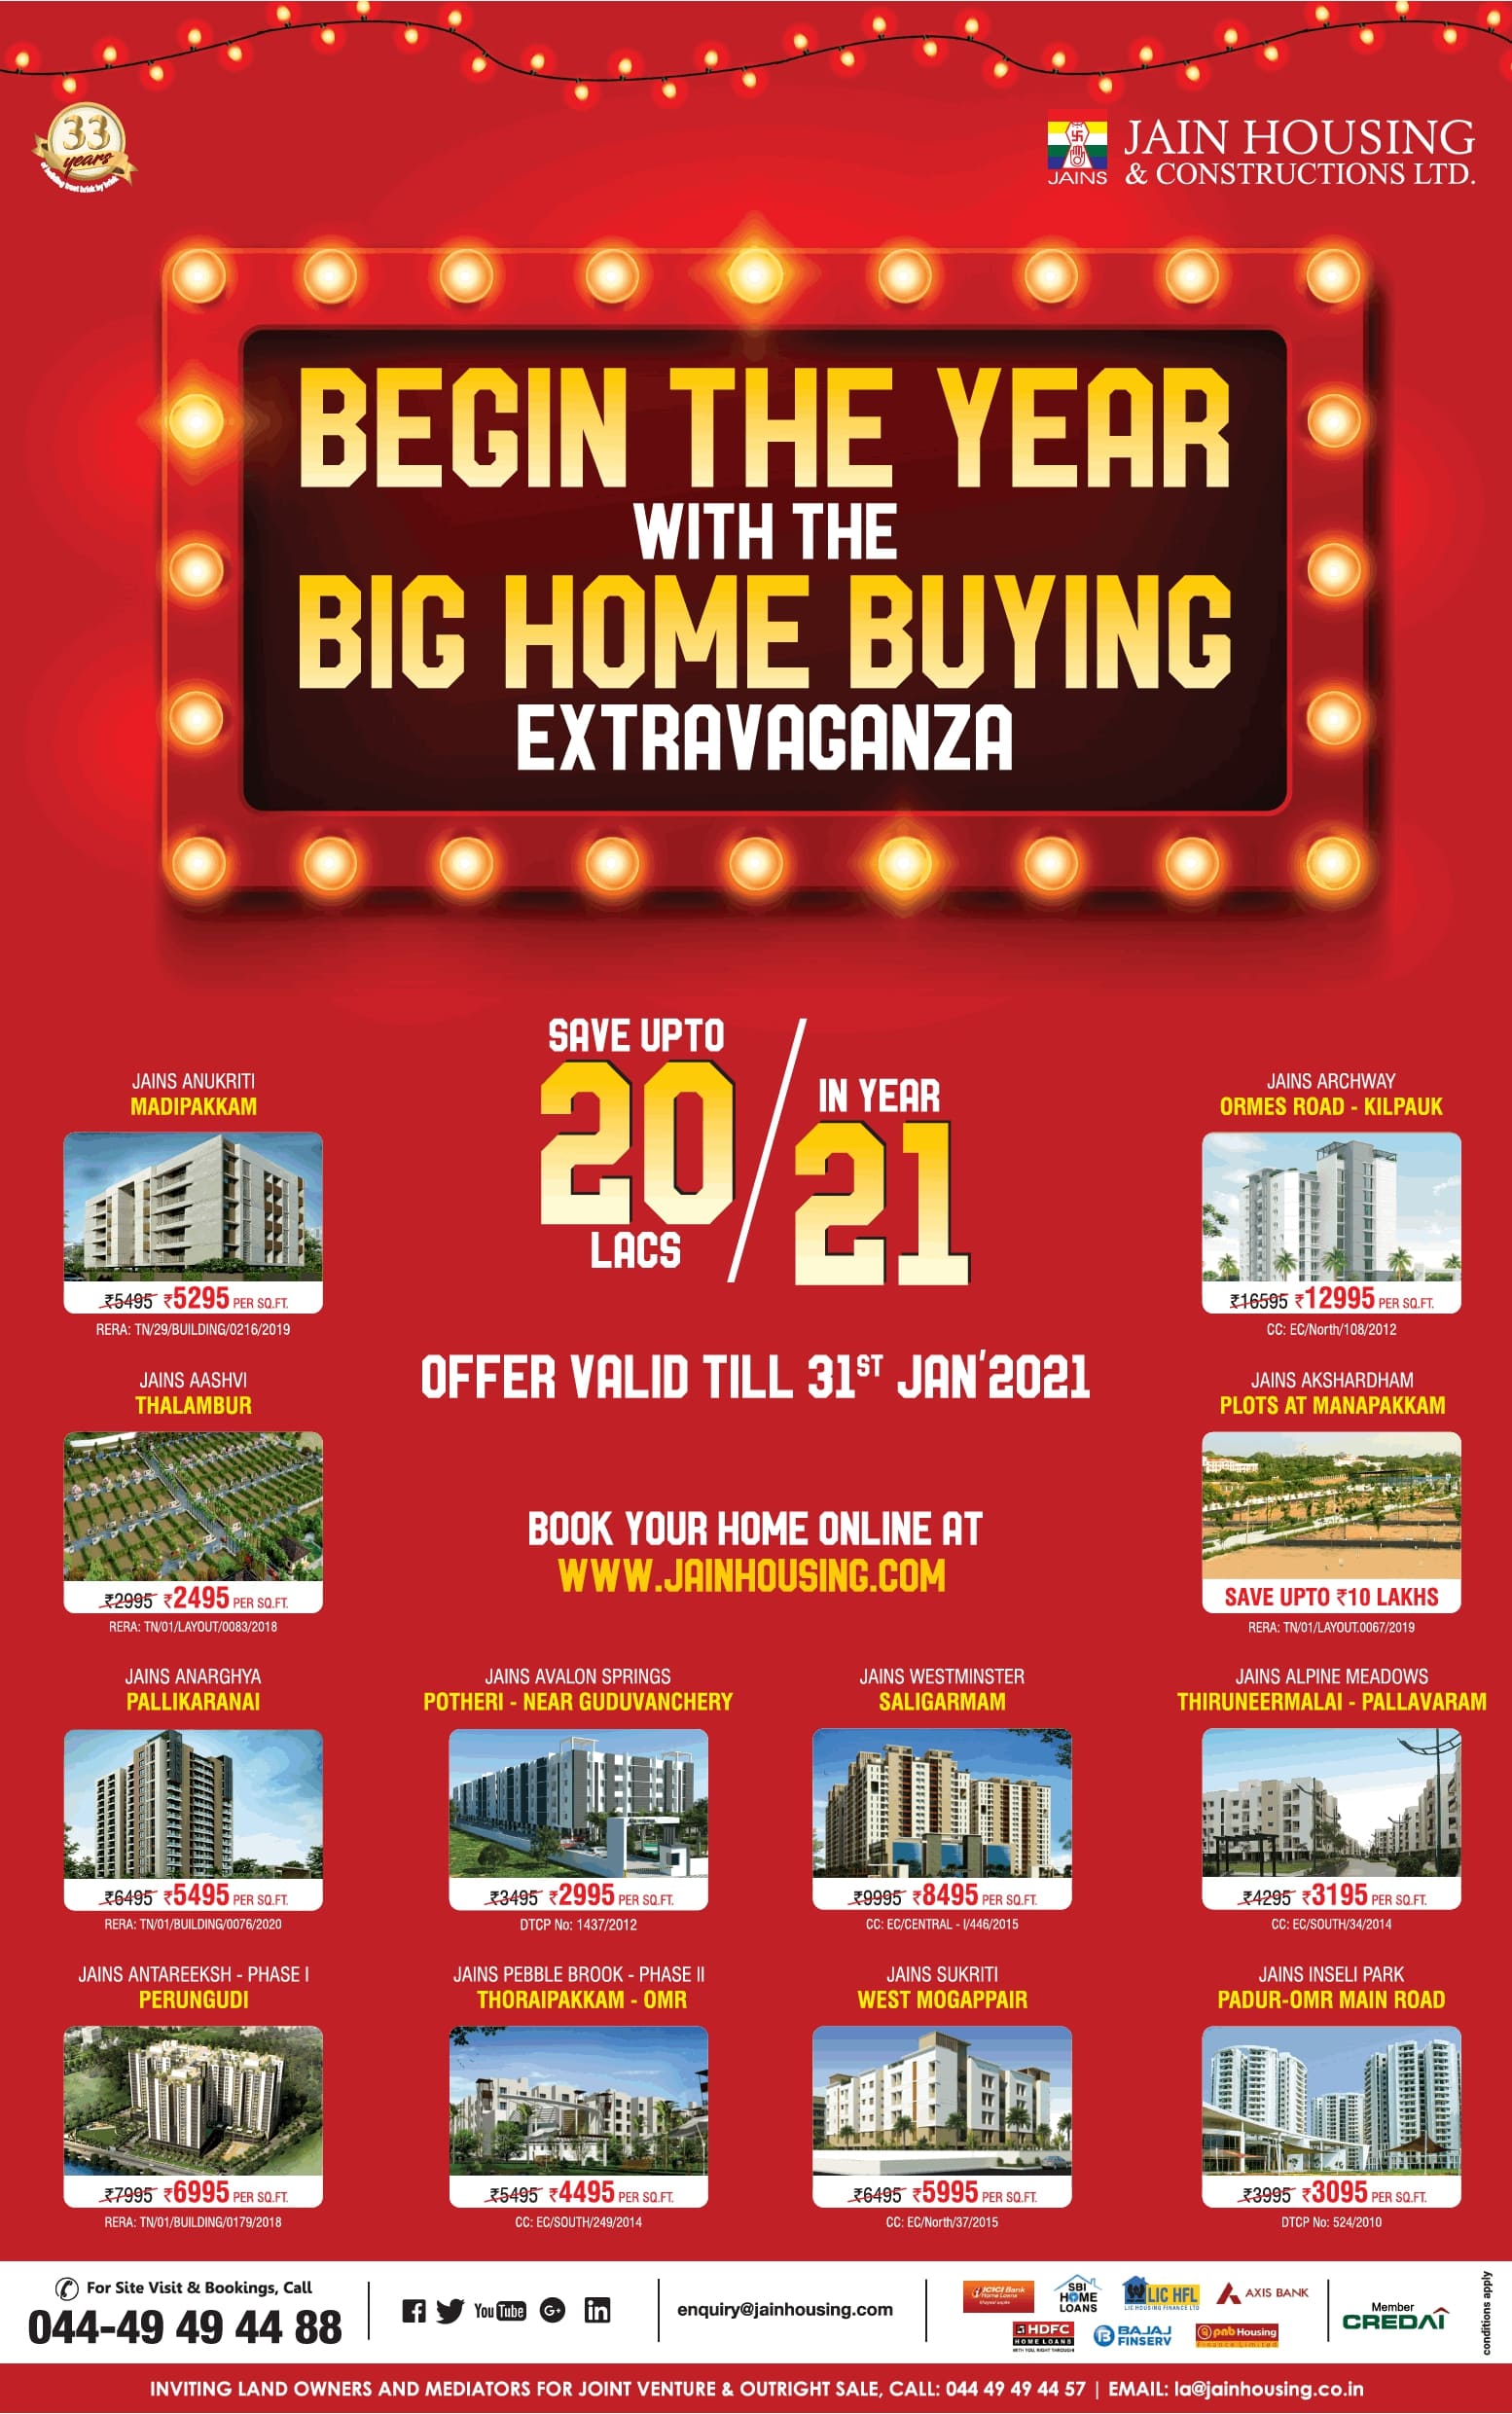 jain-housing-and-construction-limited-begin-the-year-with-big-home-buying-ad-property-times-chennai-30-01-2021